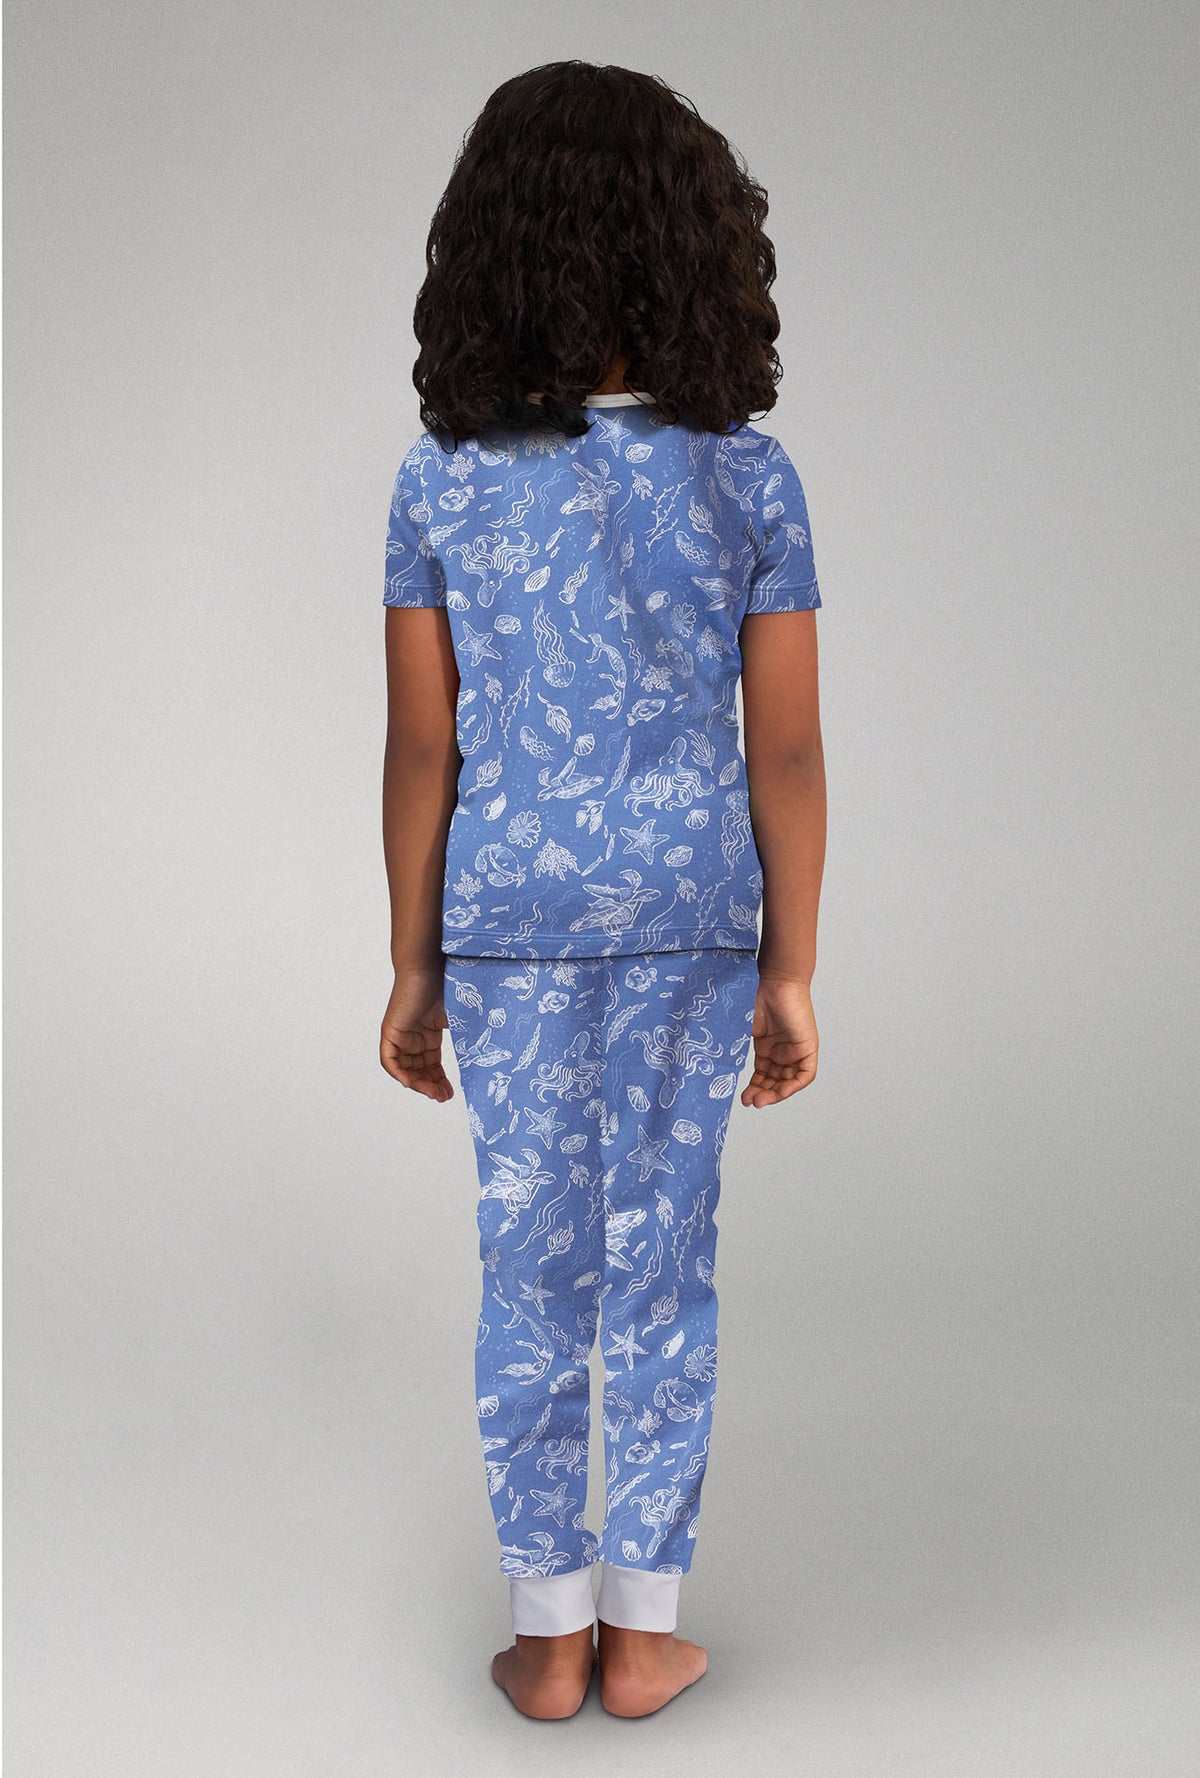 A girl wearing blue short sleeve stretch jersey pj set with high tide print.